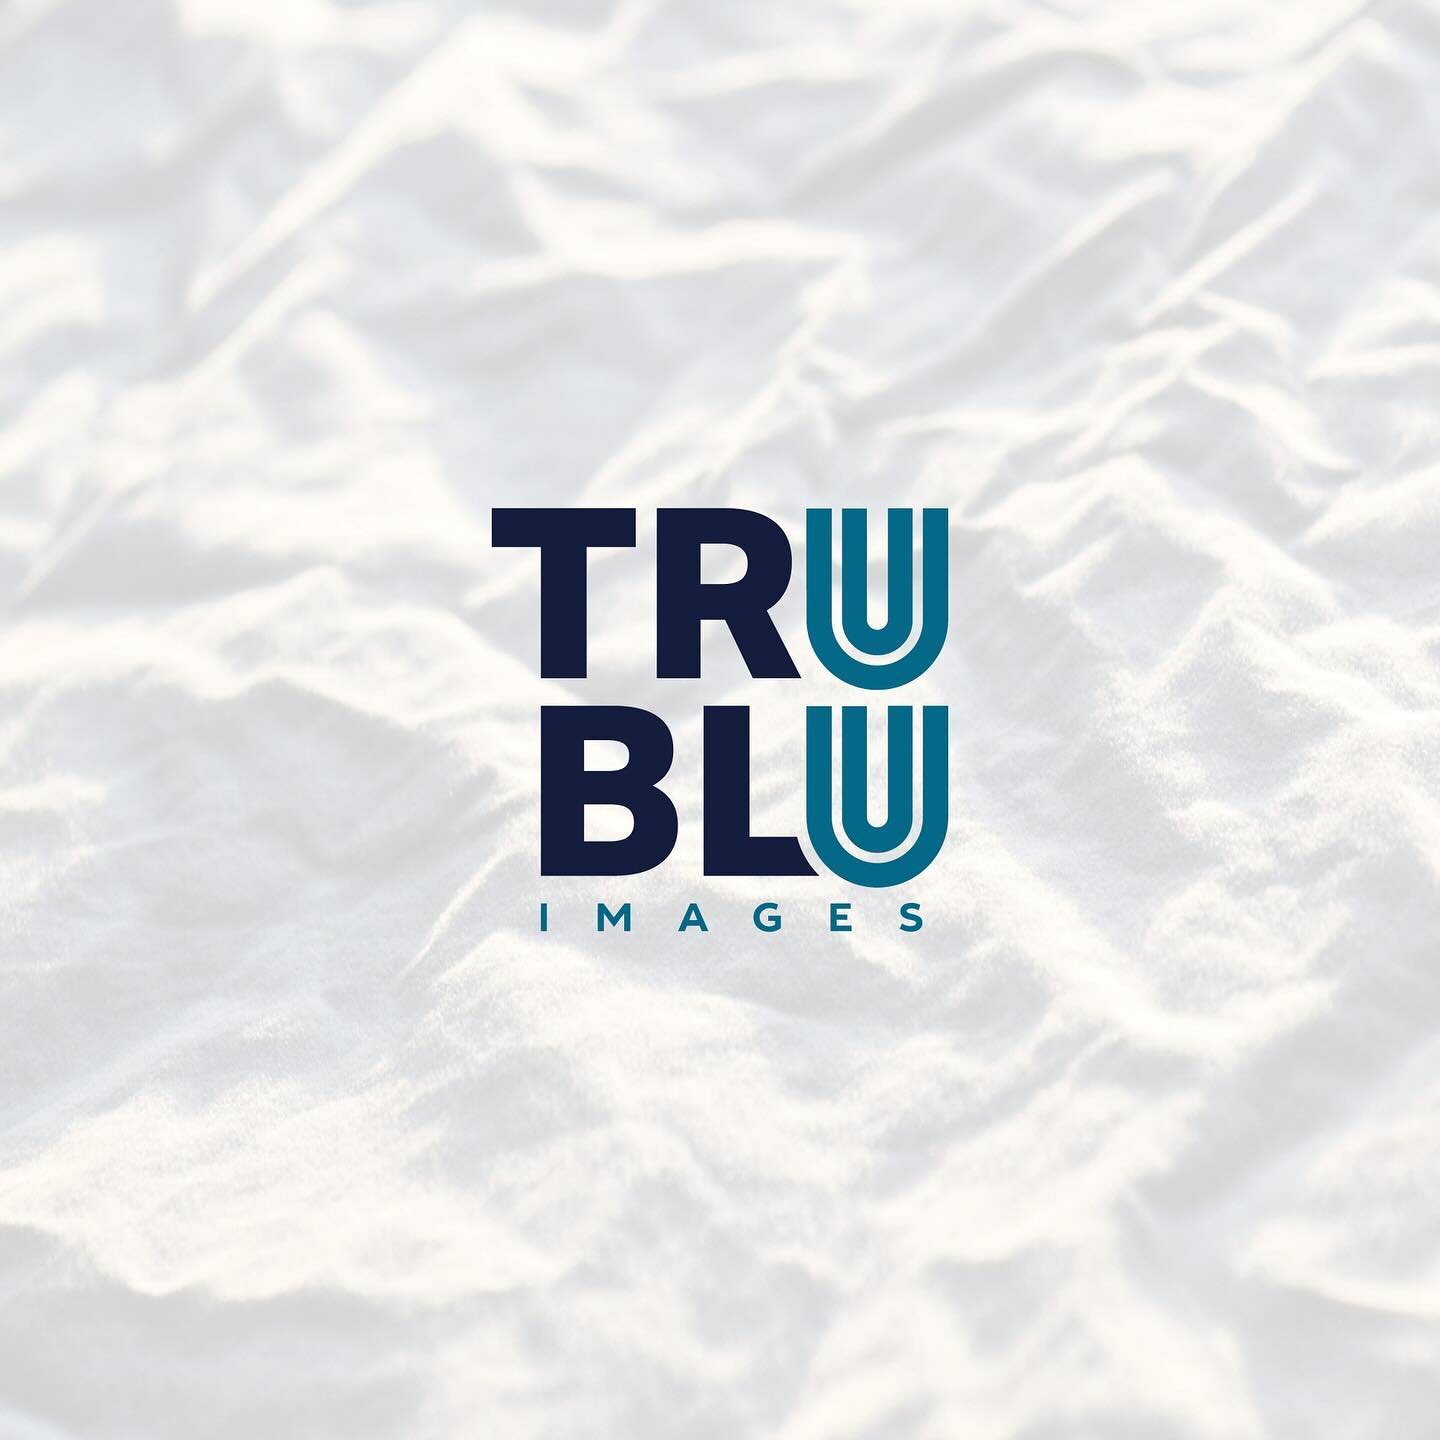 TruBlu Images just celebrated 10 years in business and I had to share another look at the branding + website we developed a few years ago when Rebecca was ready for an update. Here&rsquo;s what we did for this project: ⁠
⁠
&bull; Business Naming ⁠
&b